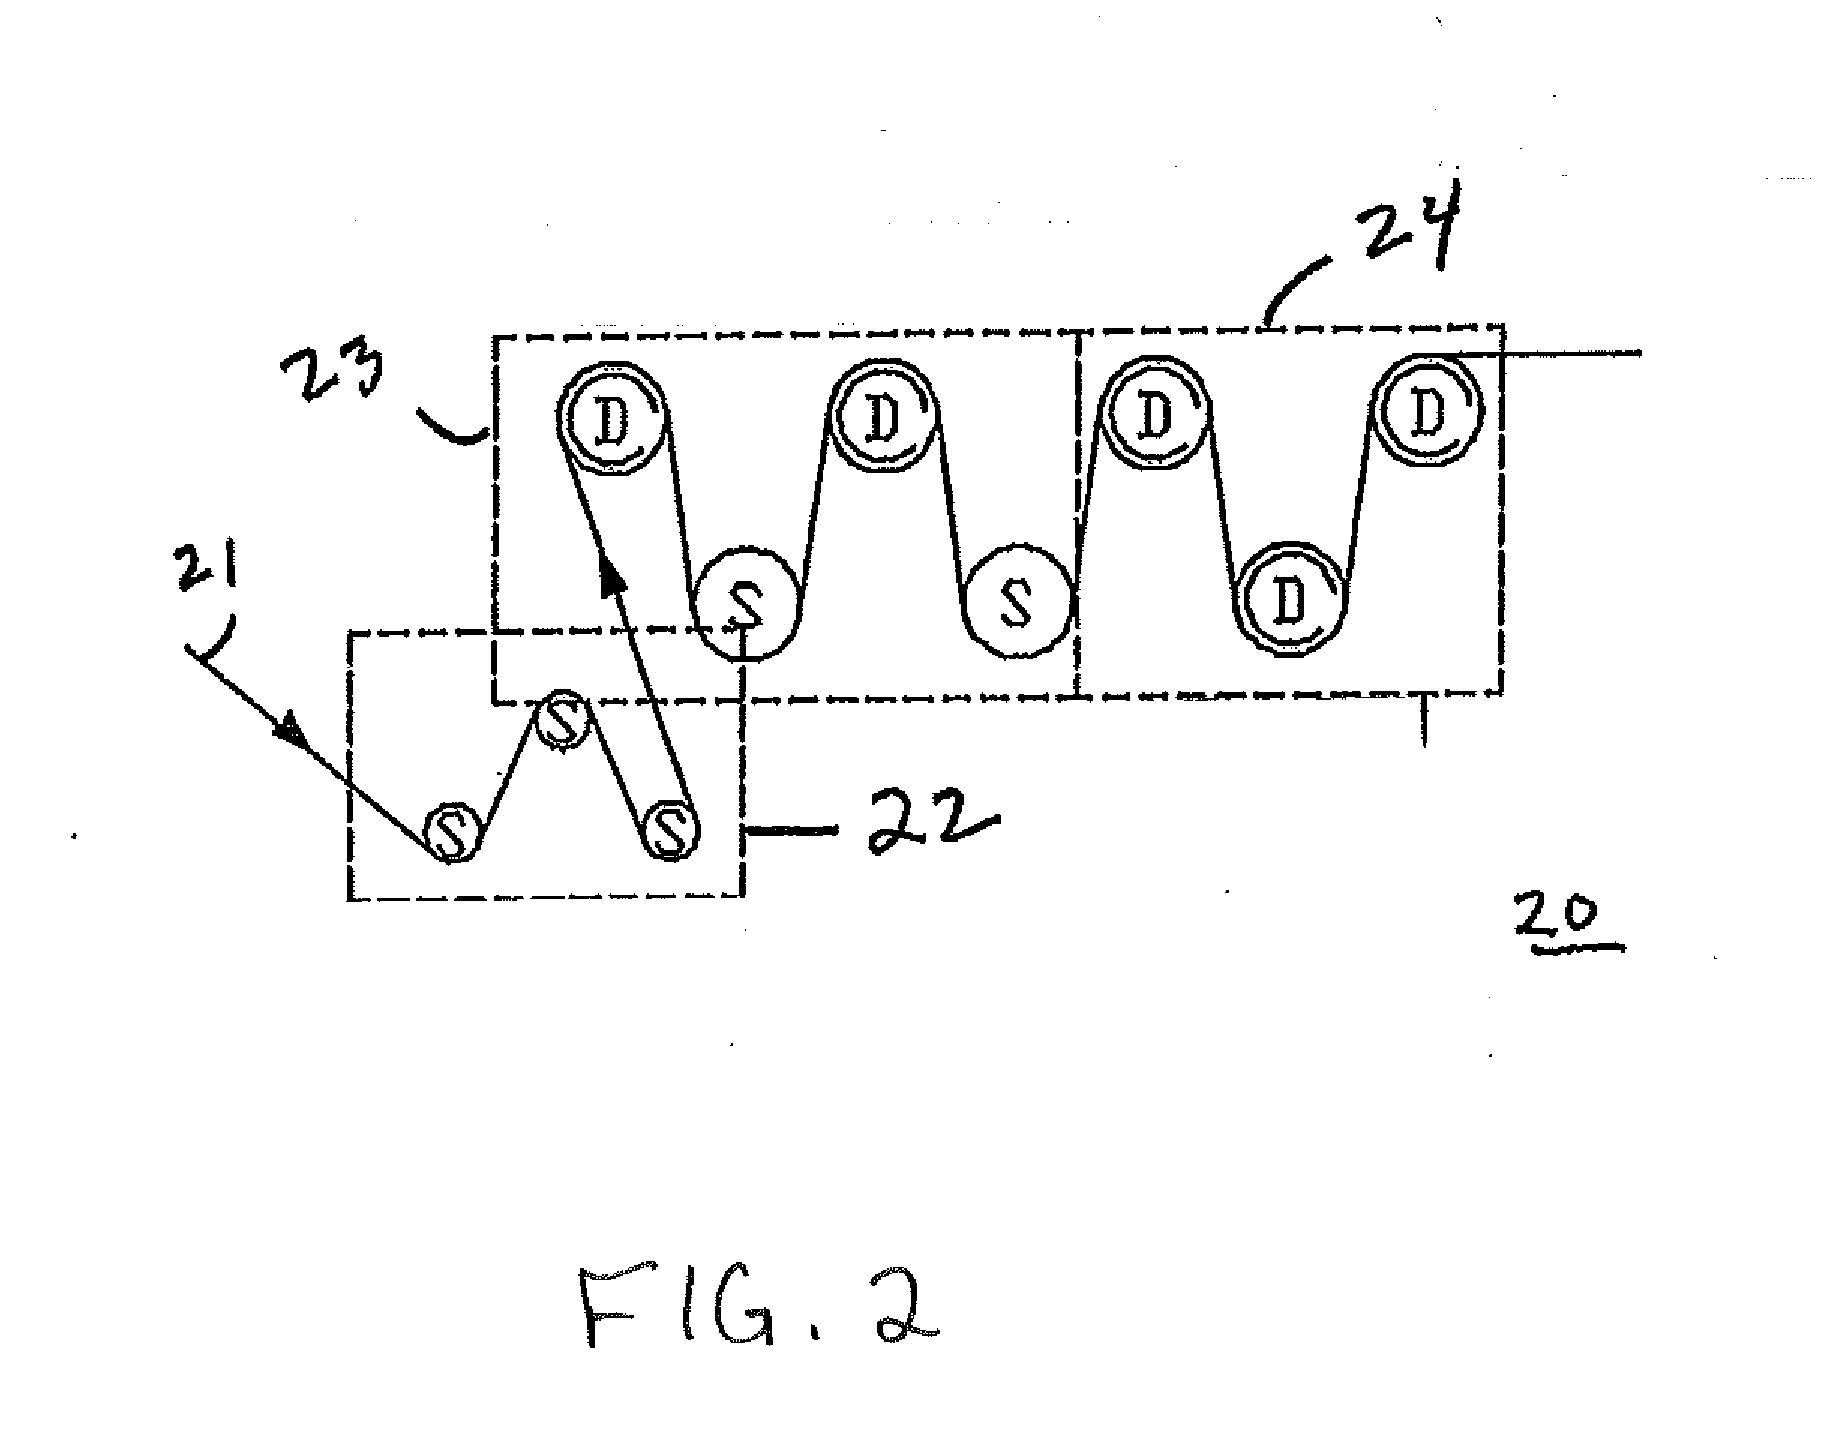 Apparatus and methods for spreading fiber bundles for the continuous production of prepreg